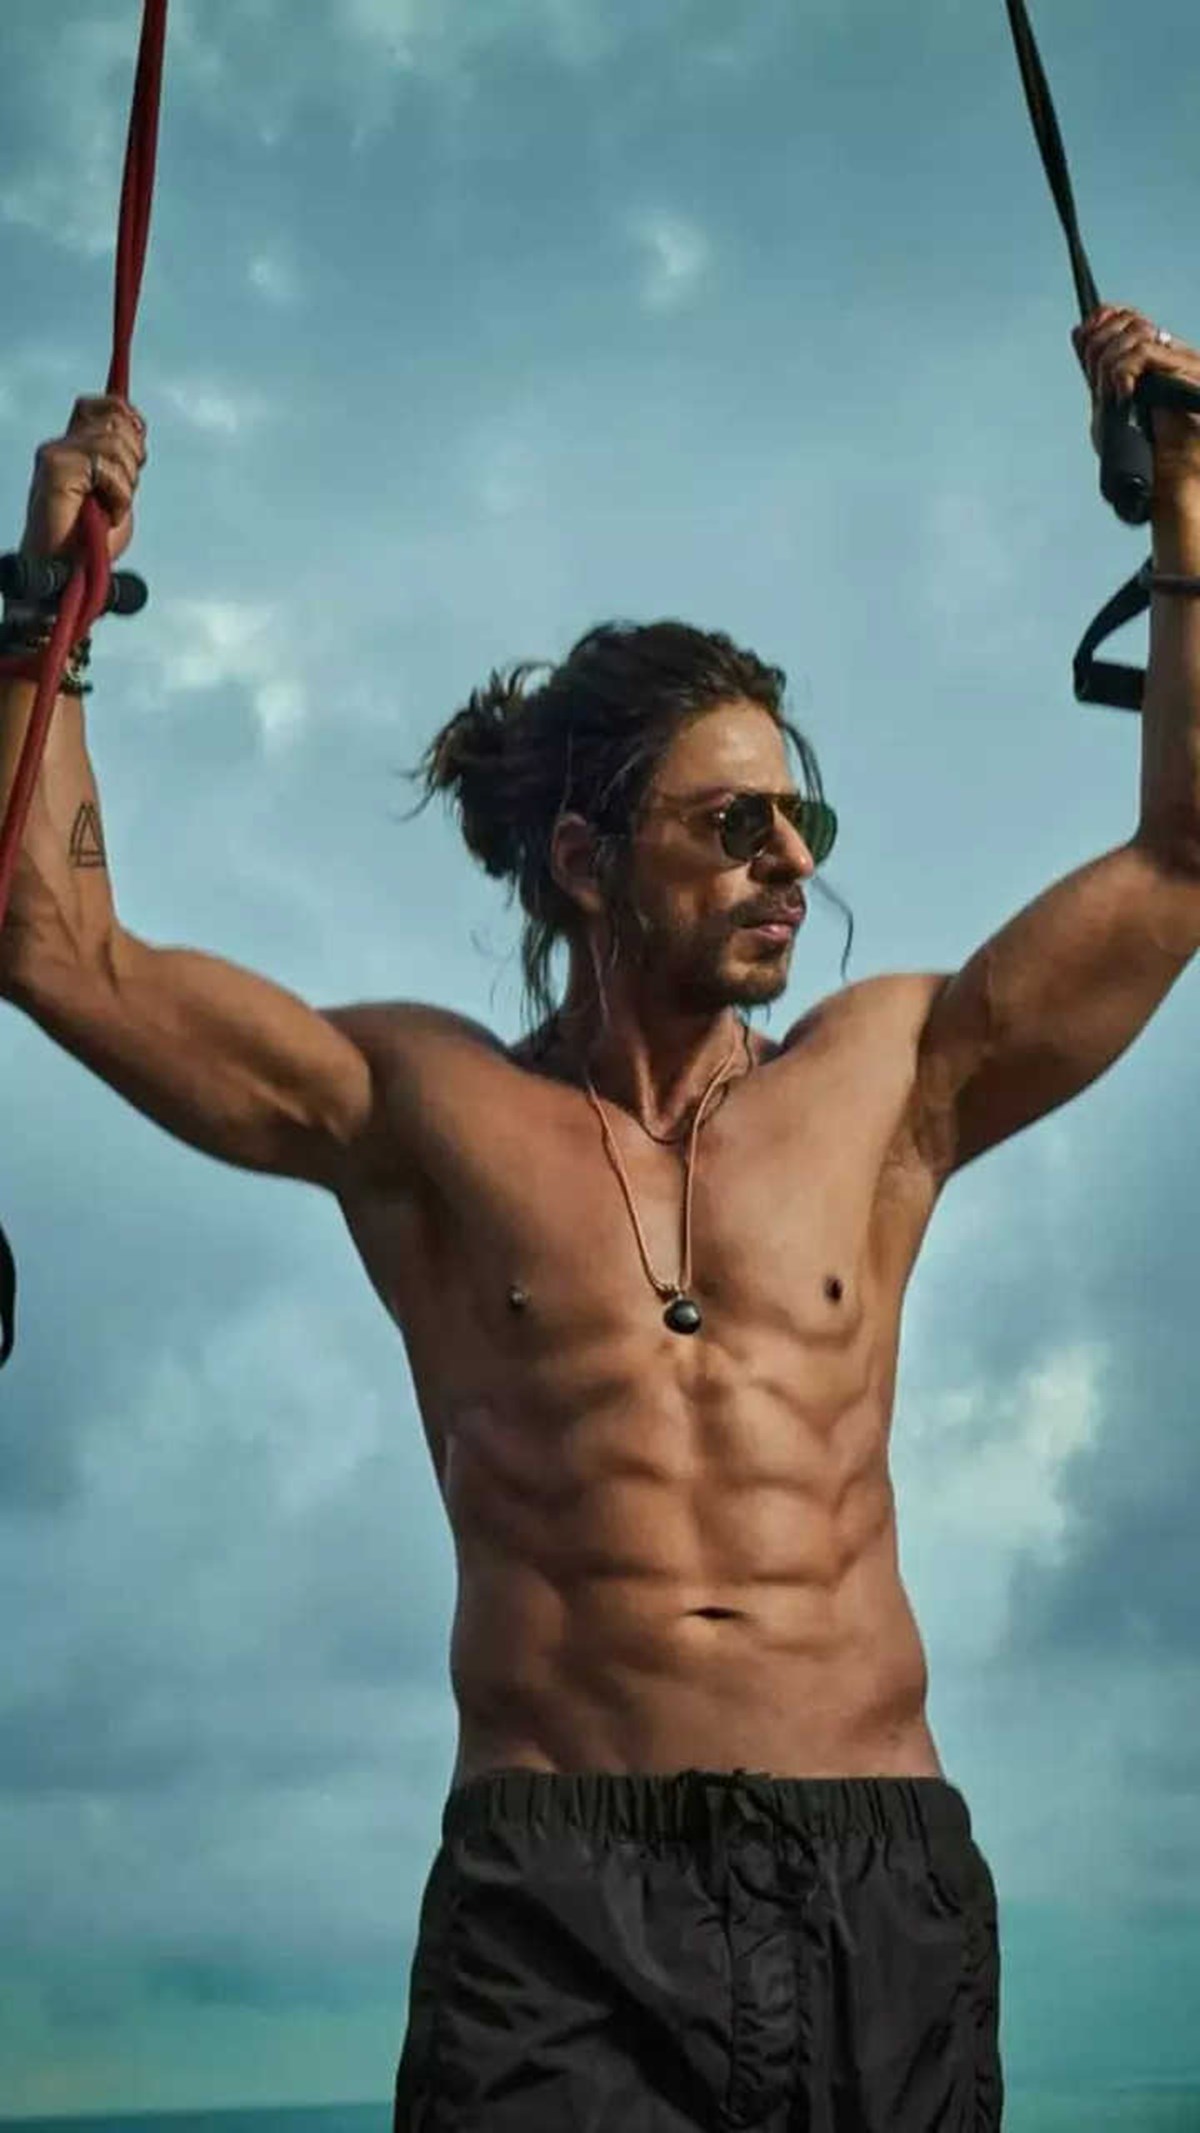 Woman Reveals Shah Rukh Khan Follows 'The Onion' And People Find it 'Hot' -  News18